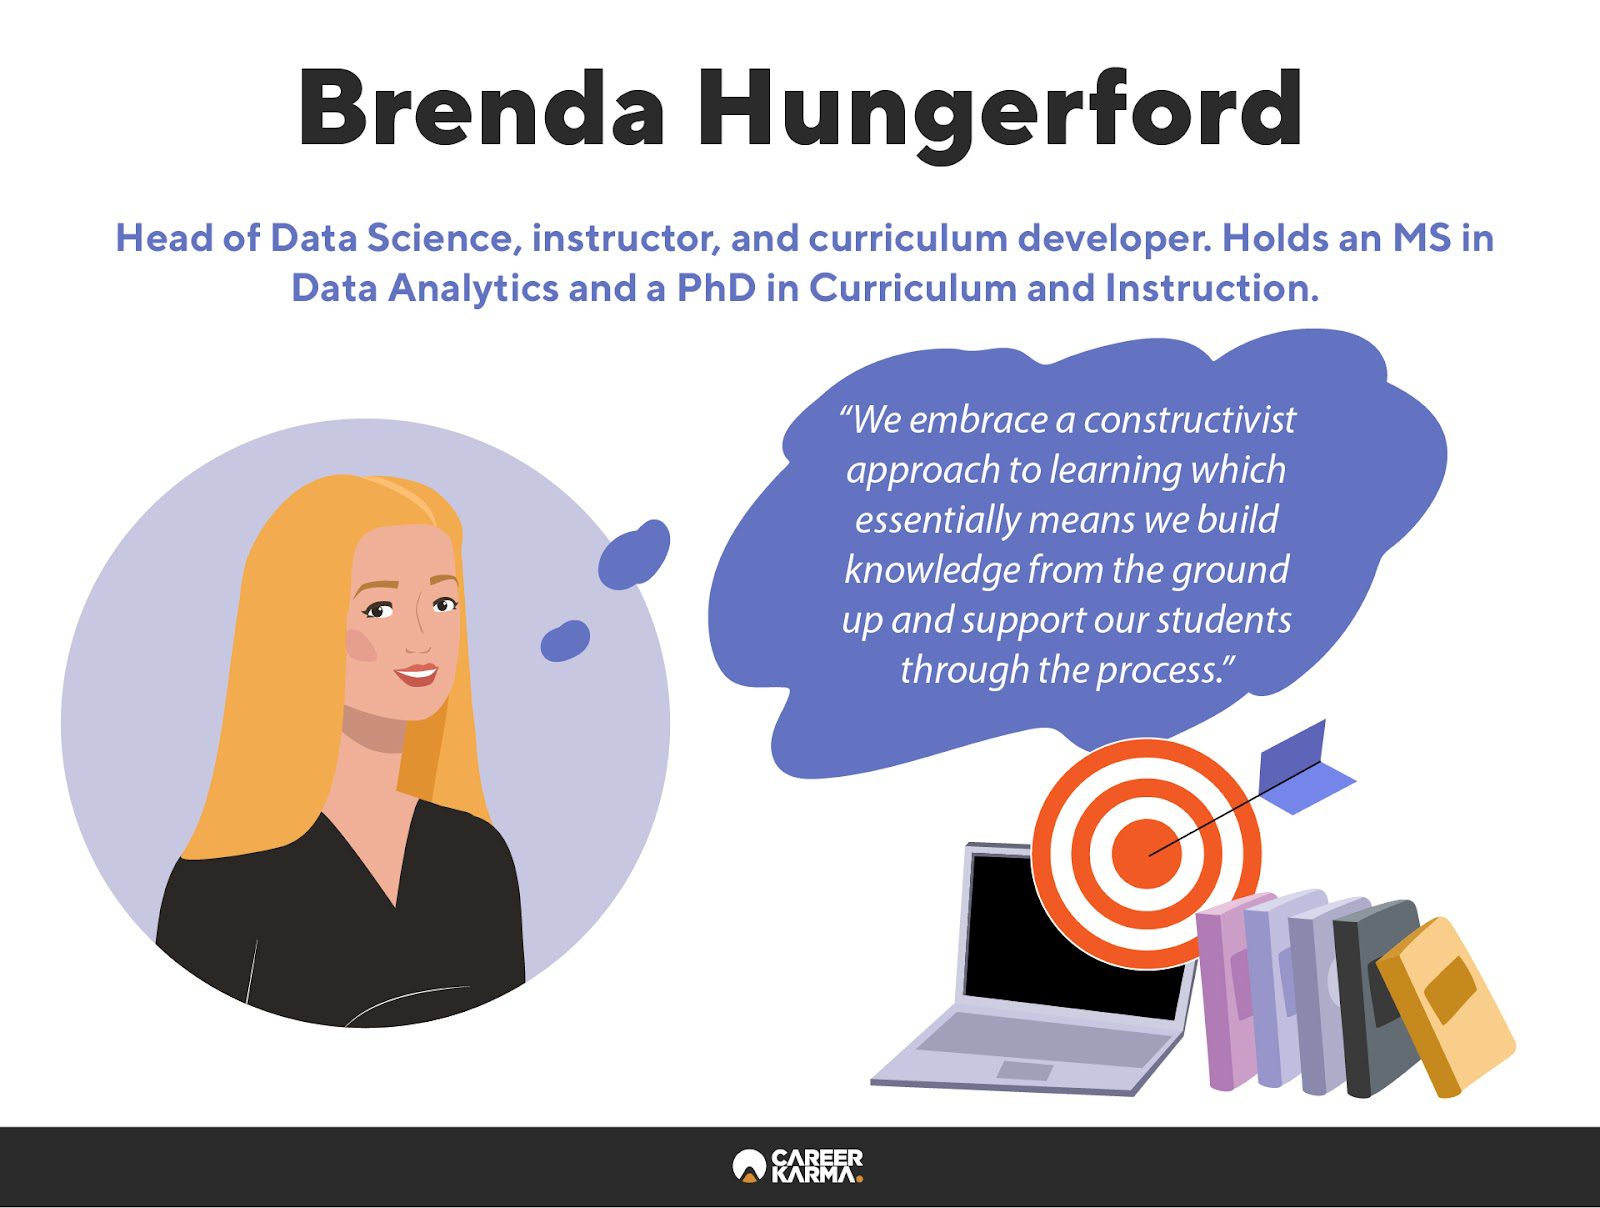 An infographic highlighting Coding Dojo Data Science instructor Brenda Hungerford’s approach to teaching